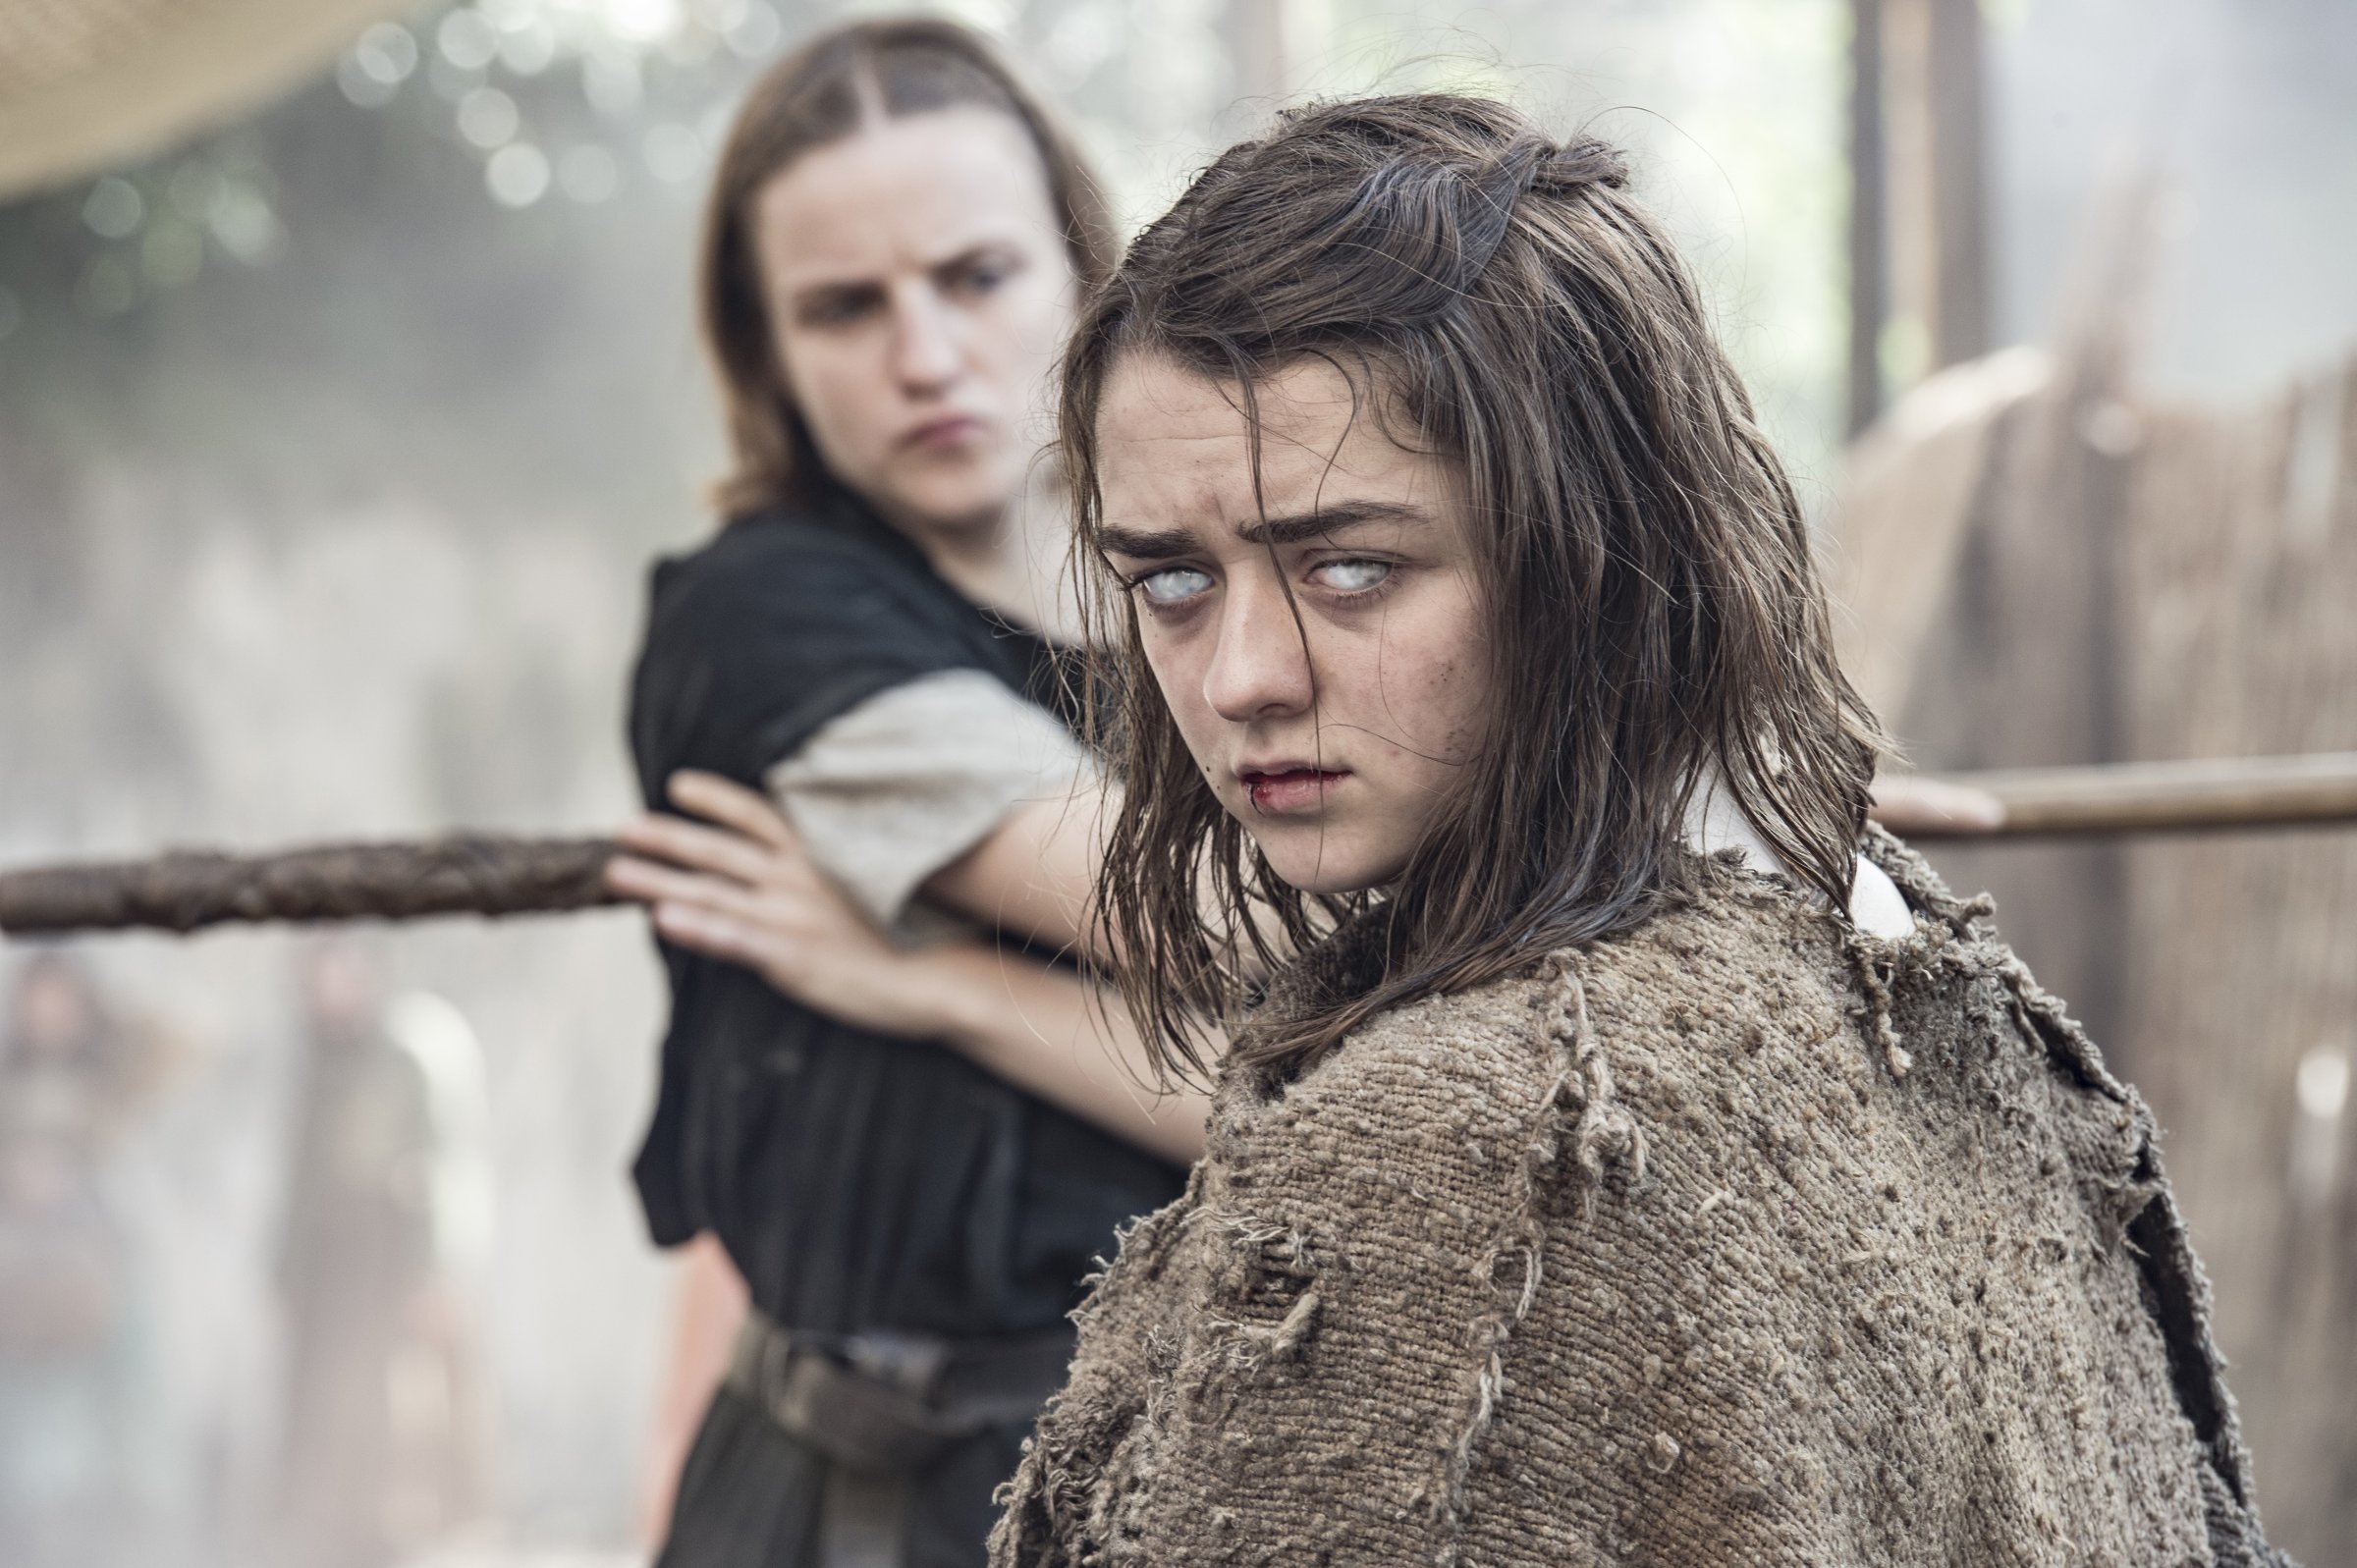 Faye Marsay and Maisie Williams in season 6, episode 1 of Game of Thrones.